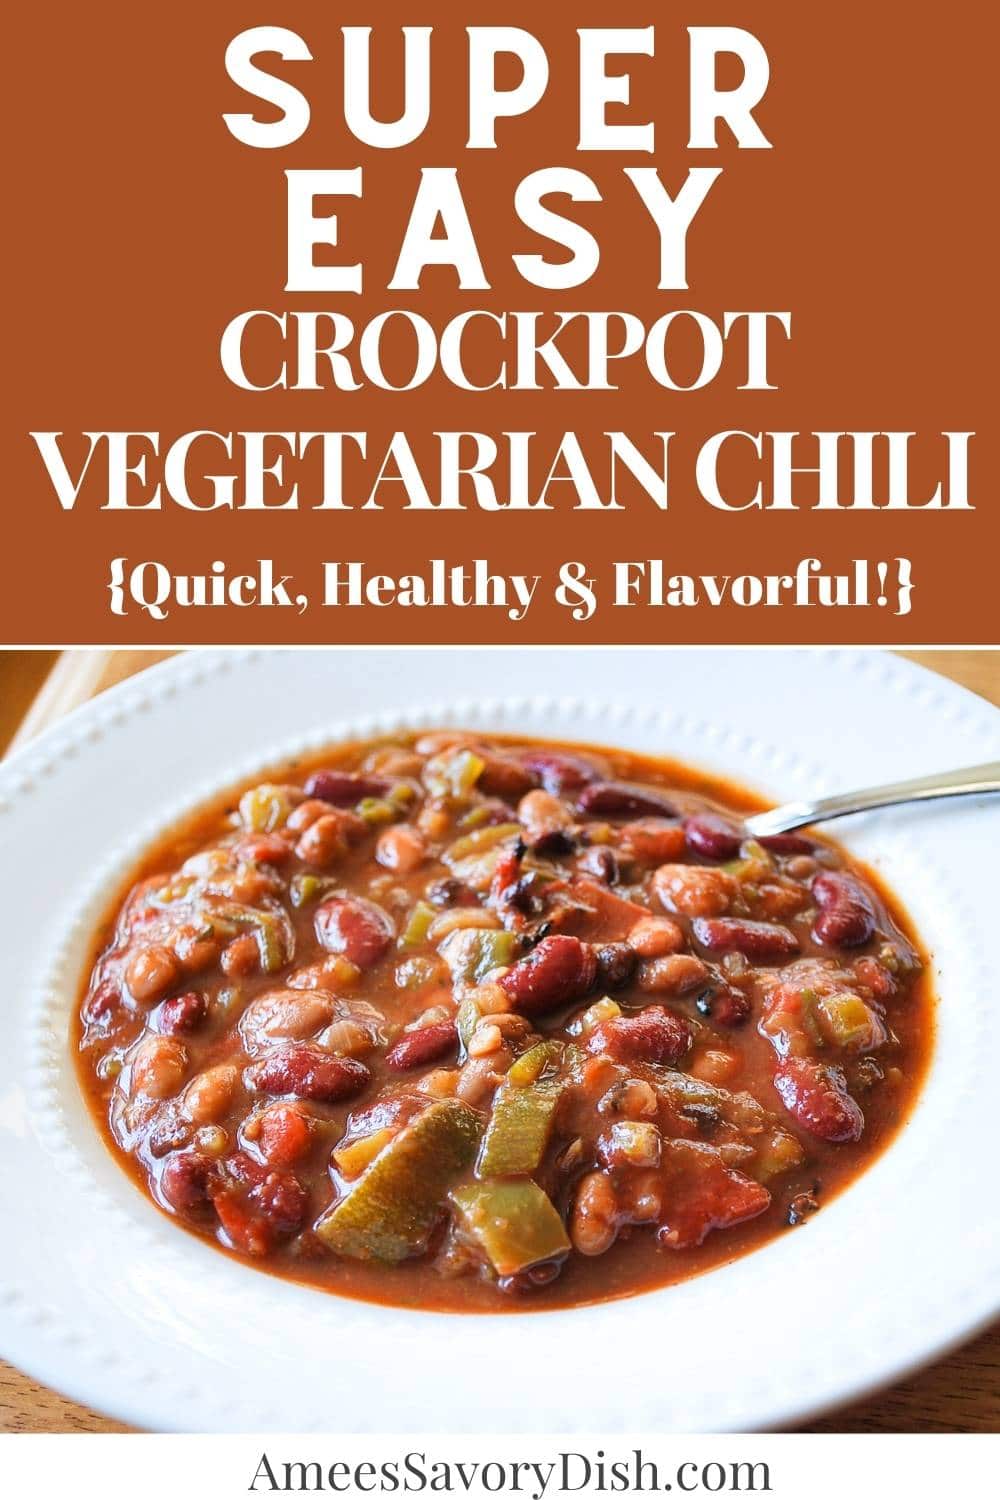 Make this Super Easy Crockpot Vegetarian Chili and let your slow cooker do most of the work! This bean, veggie, and flavor-packed stew-style chili is the perfect meatless meal for weeknights, potlucks, and so much more. Gluten-free, dairy-free, and vegan adaptable. via @Ameessavorydish